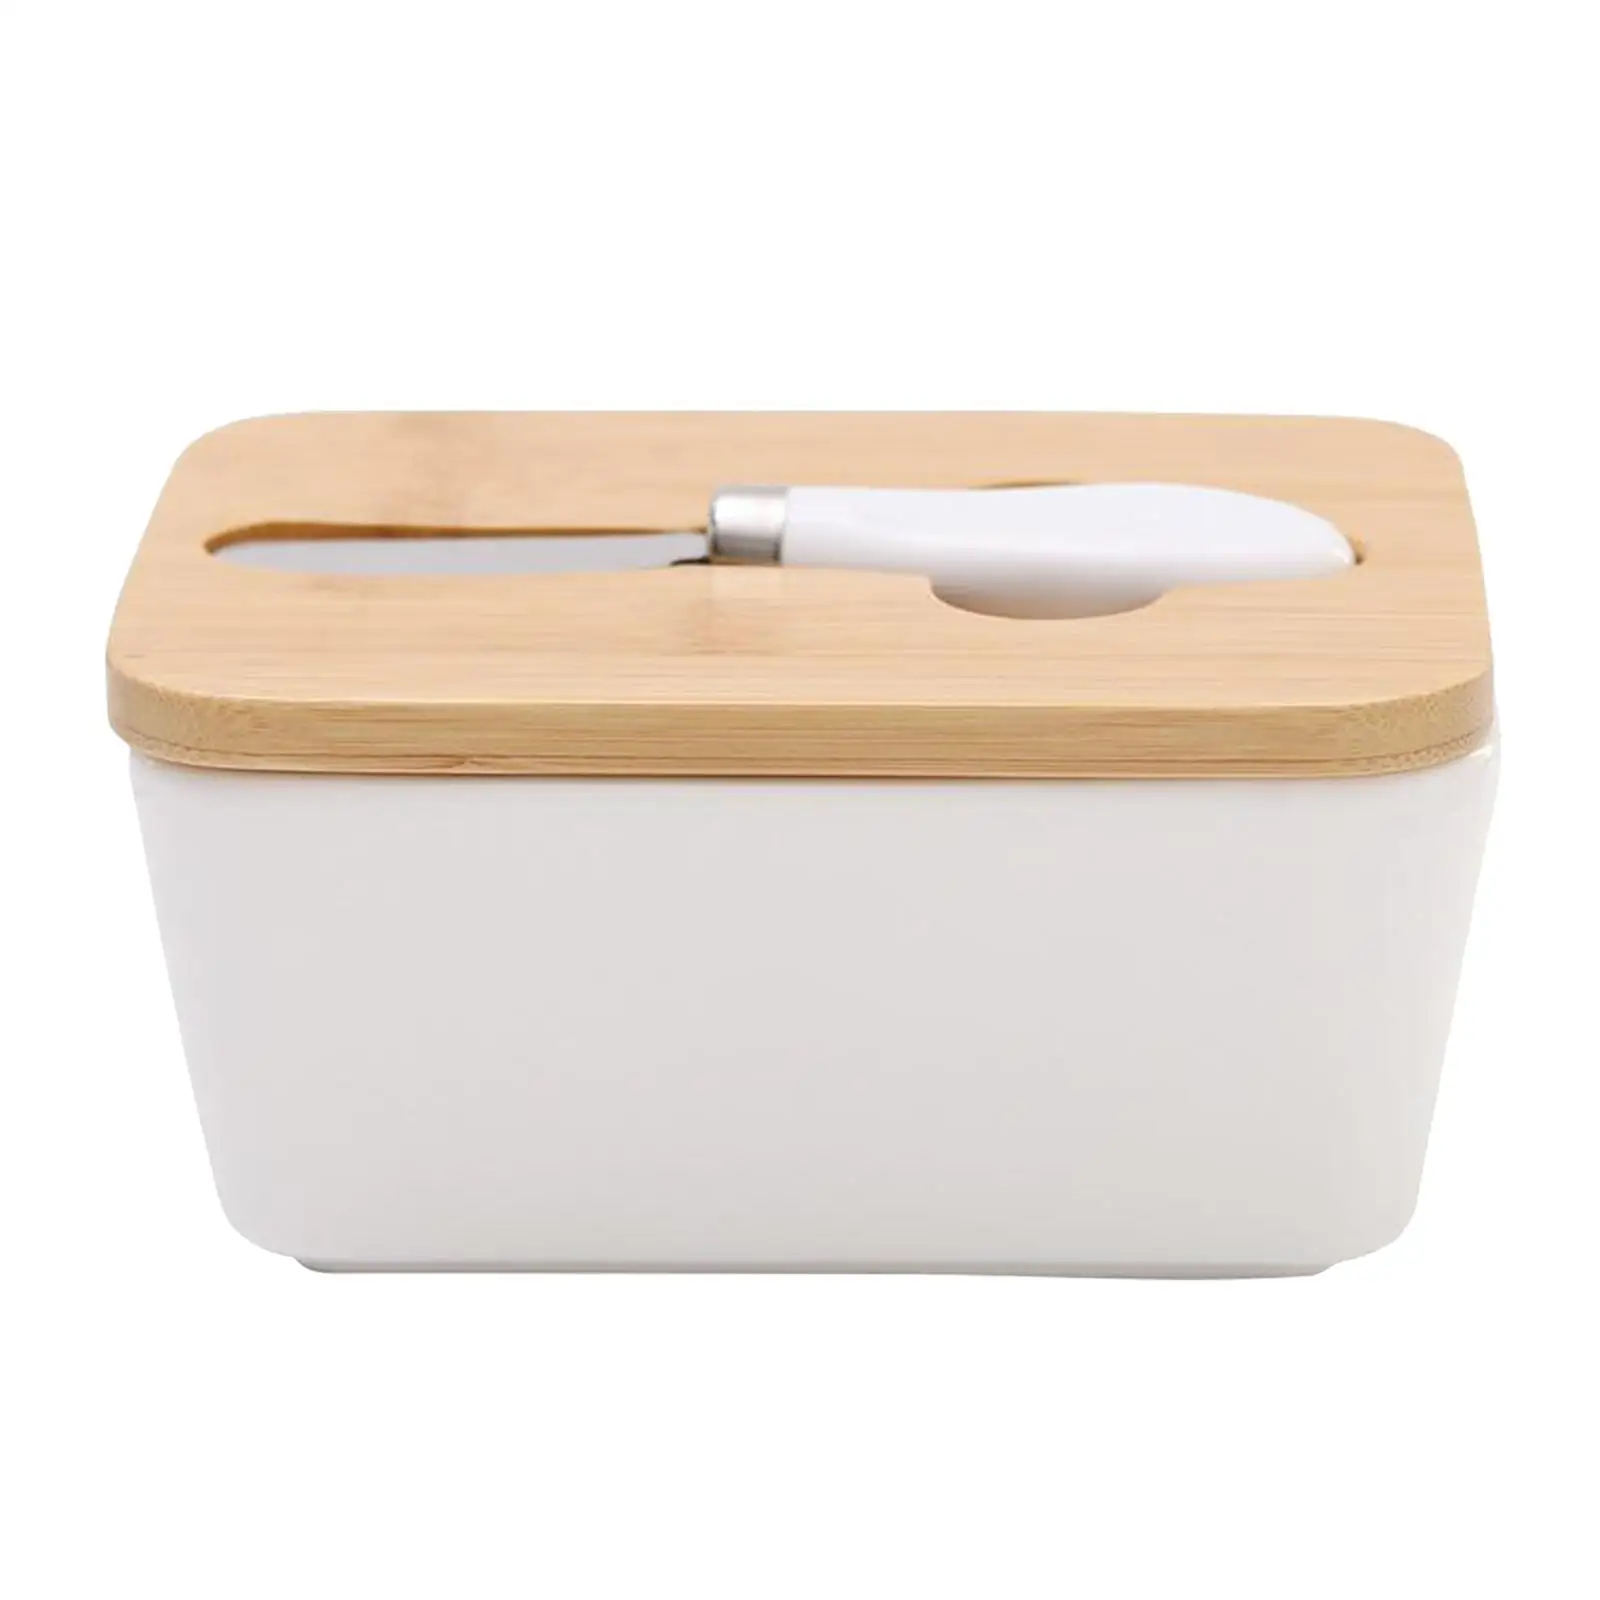 Butter Dish Ceramic Butter Container Keeper with Wooden Lid and Steel Knife, Eay to Clean, 2 Sizes Available to Choose